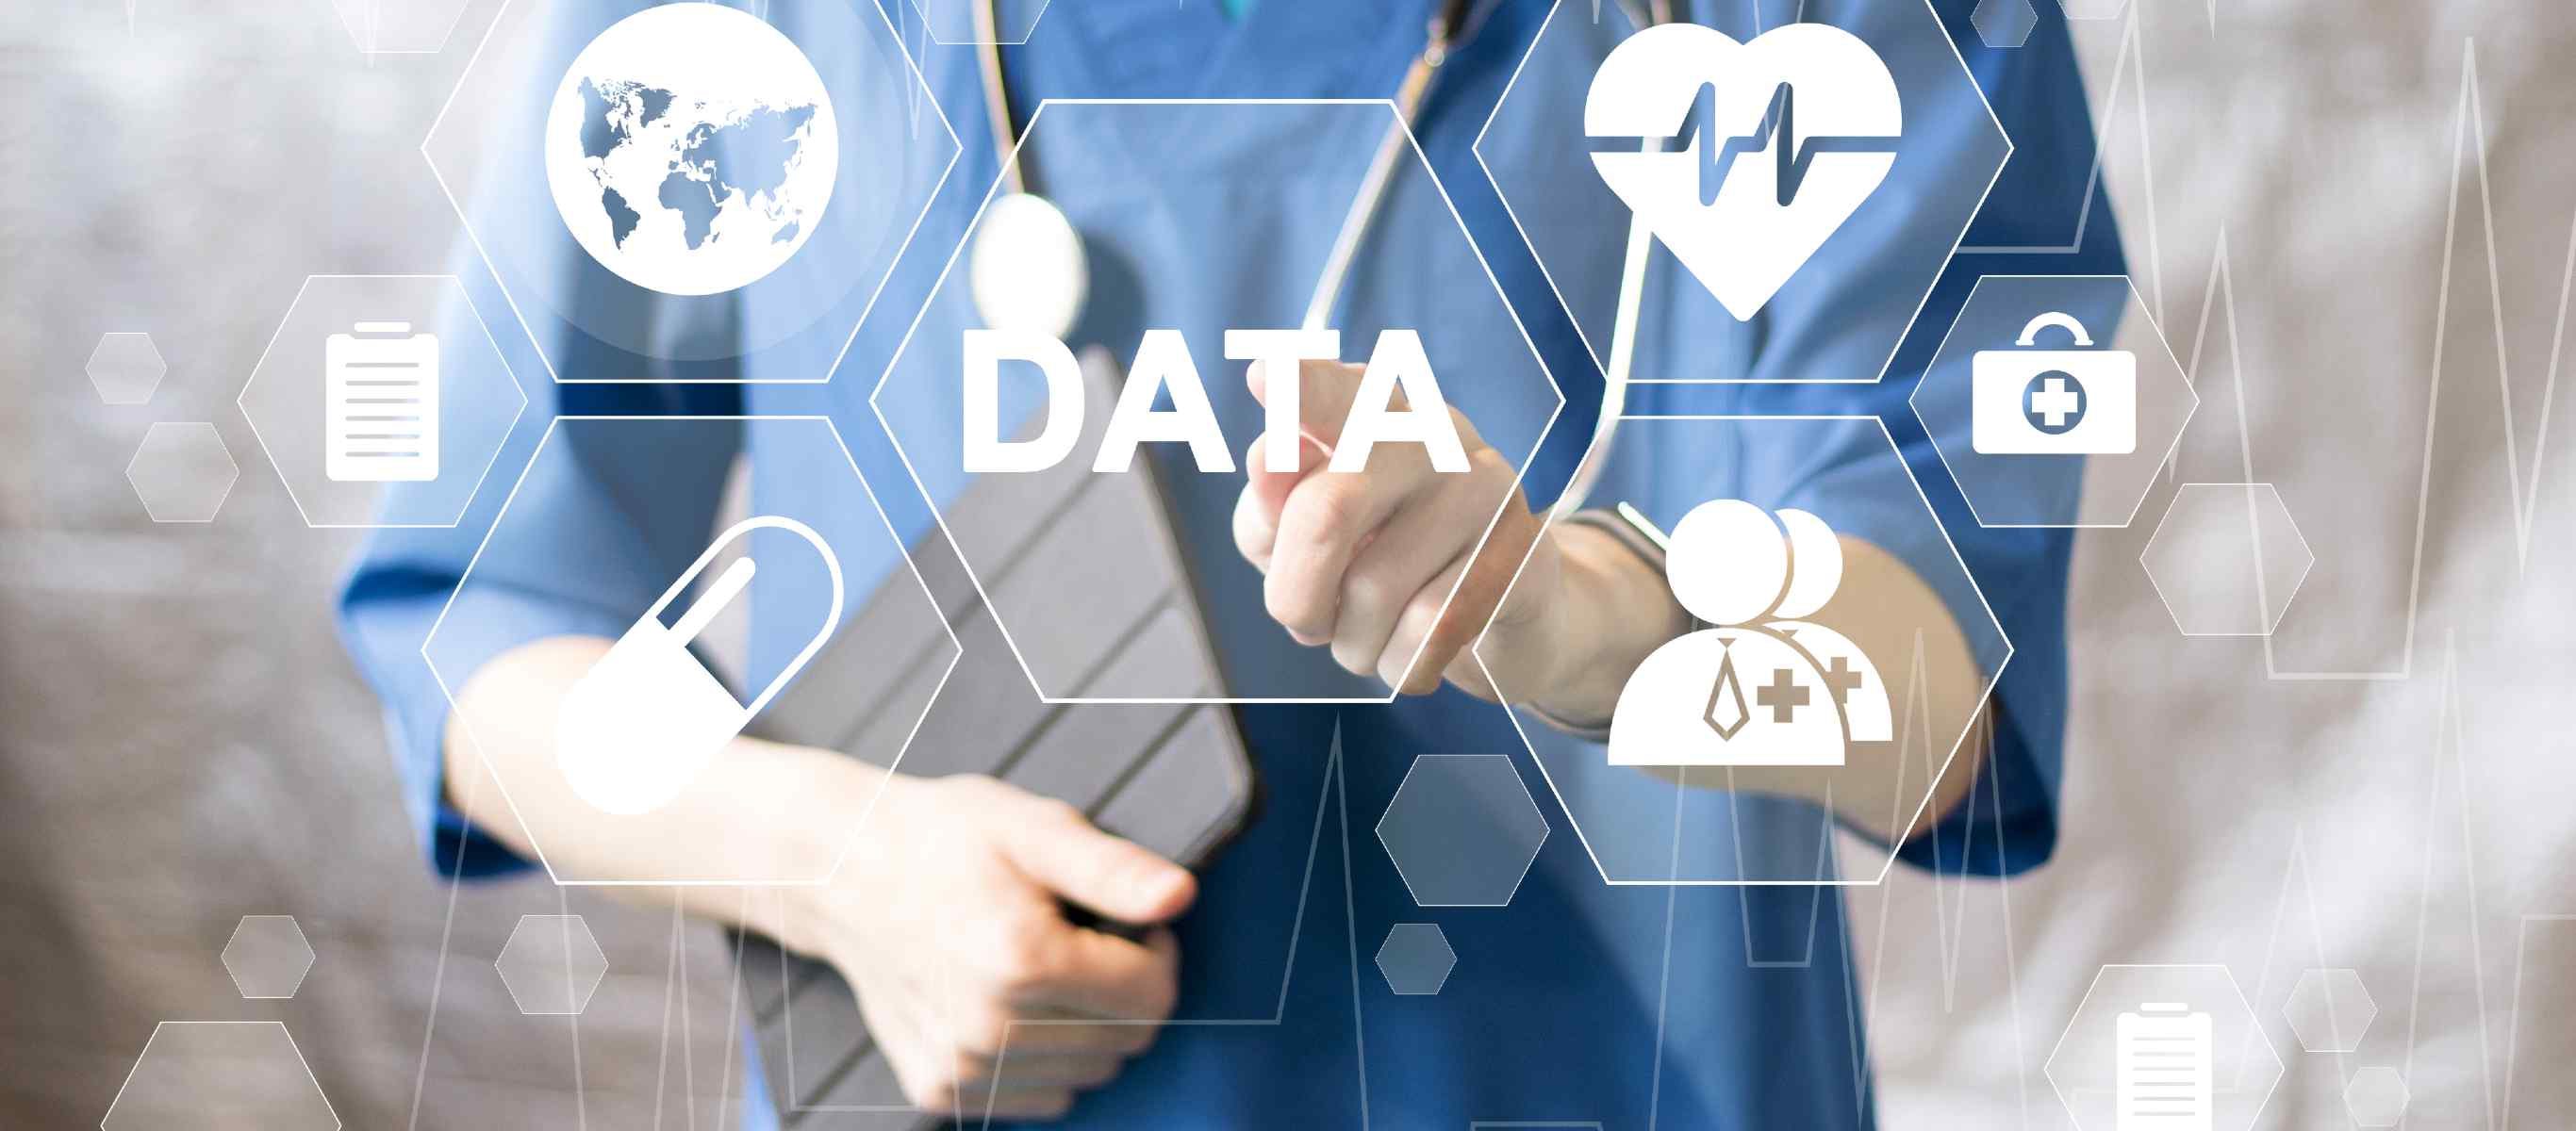 The Healthcare Industry Has a Big Problem With Data. How Do We Fix It?